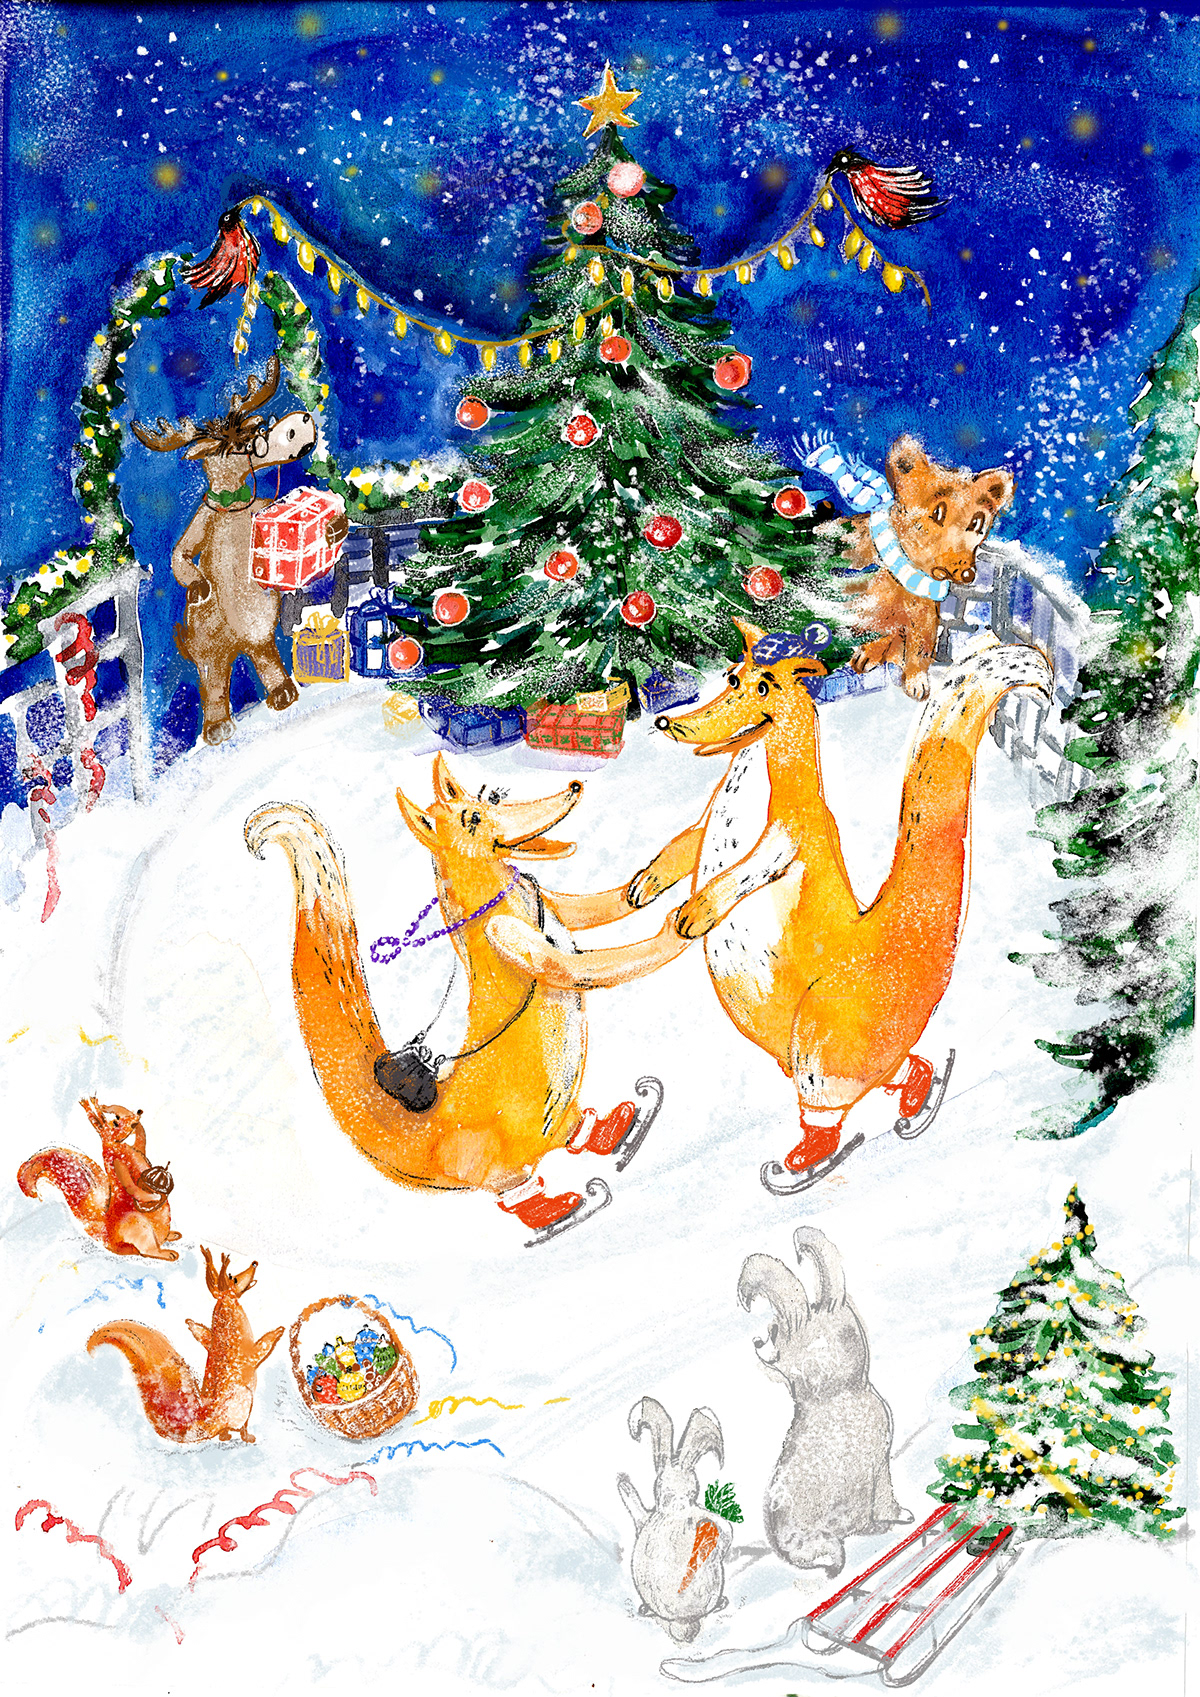 These are forest animals, elk, squirrels, bullfinches, bear cub,  foxes in a snowy environment!